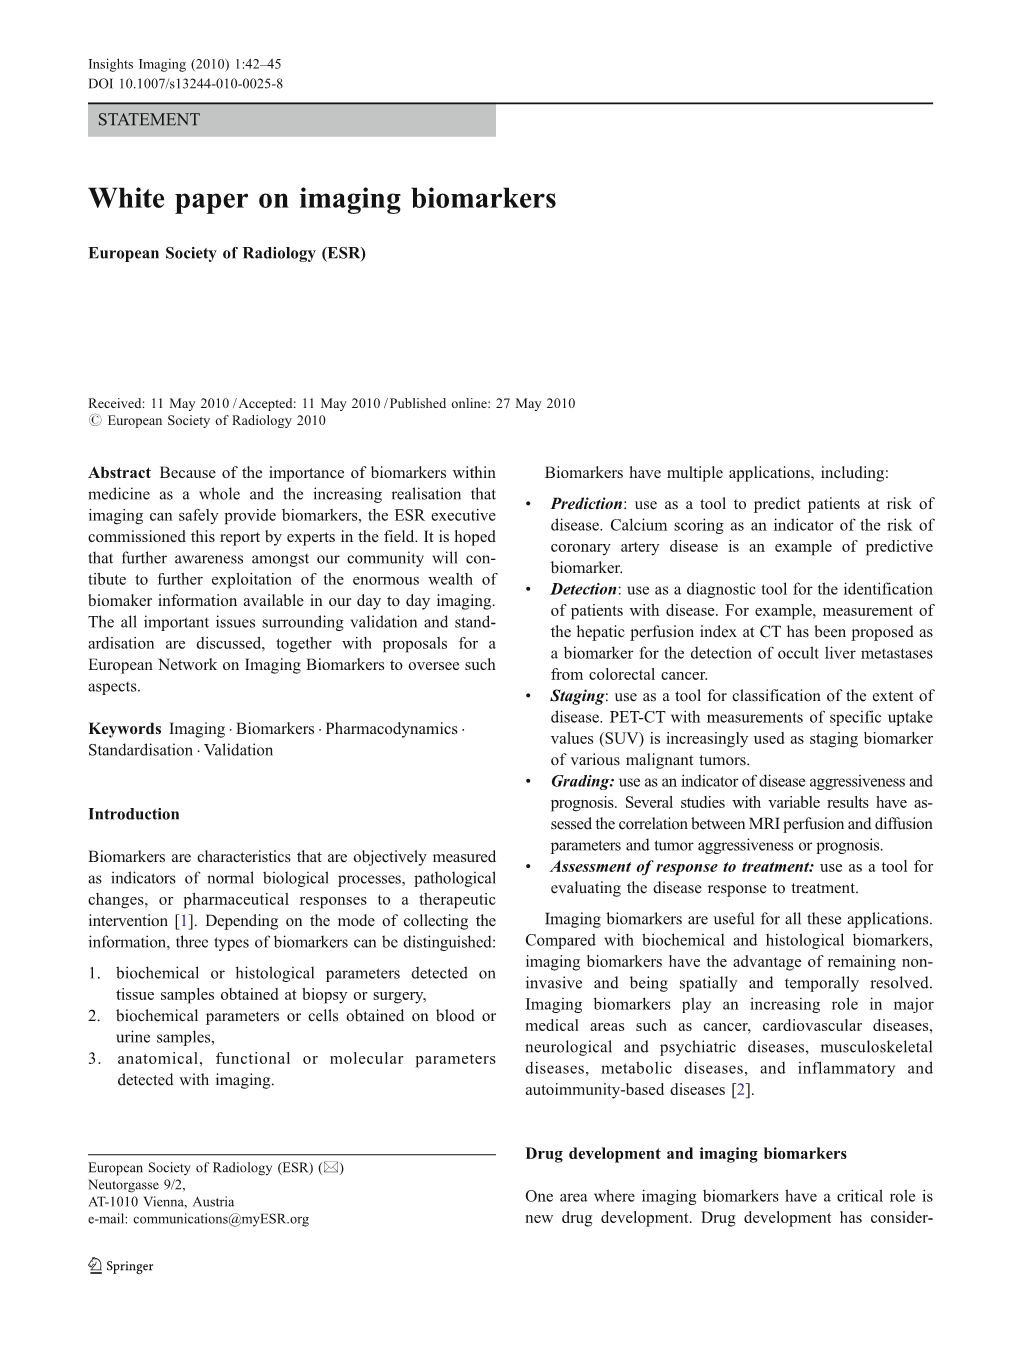 White Paper on Imaging Biomarkers